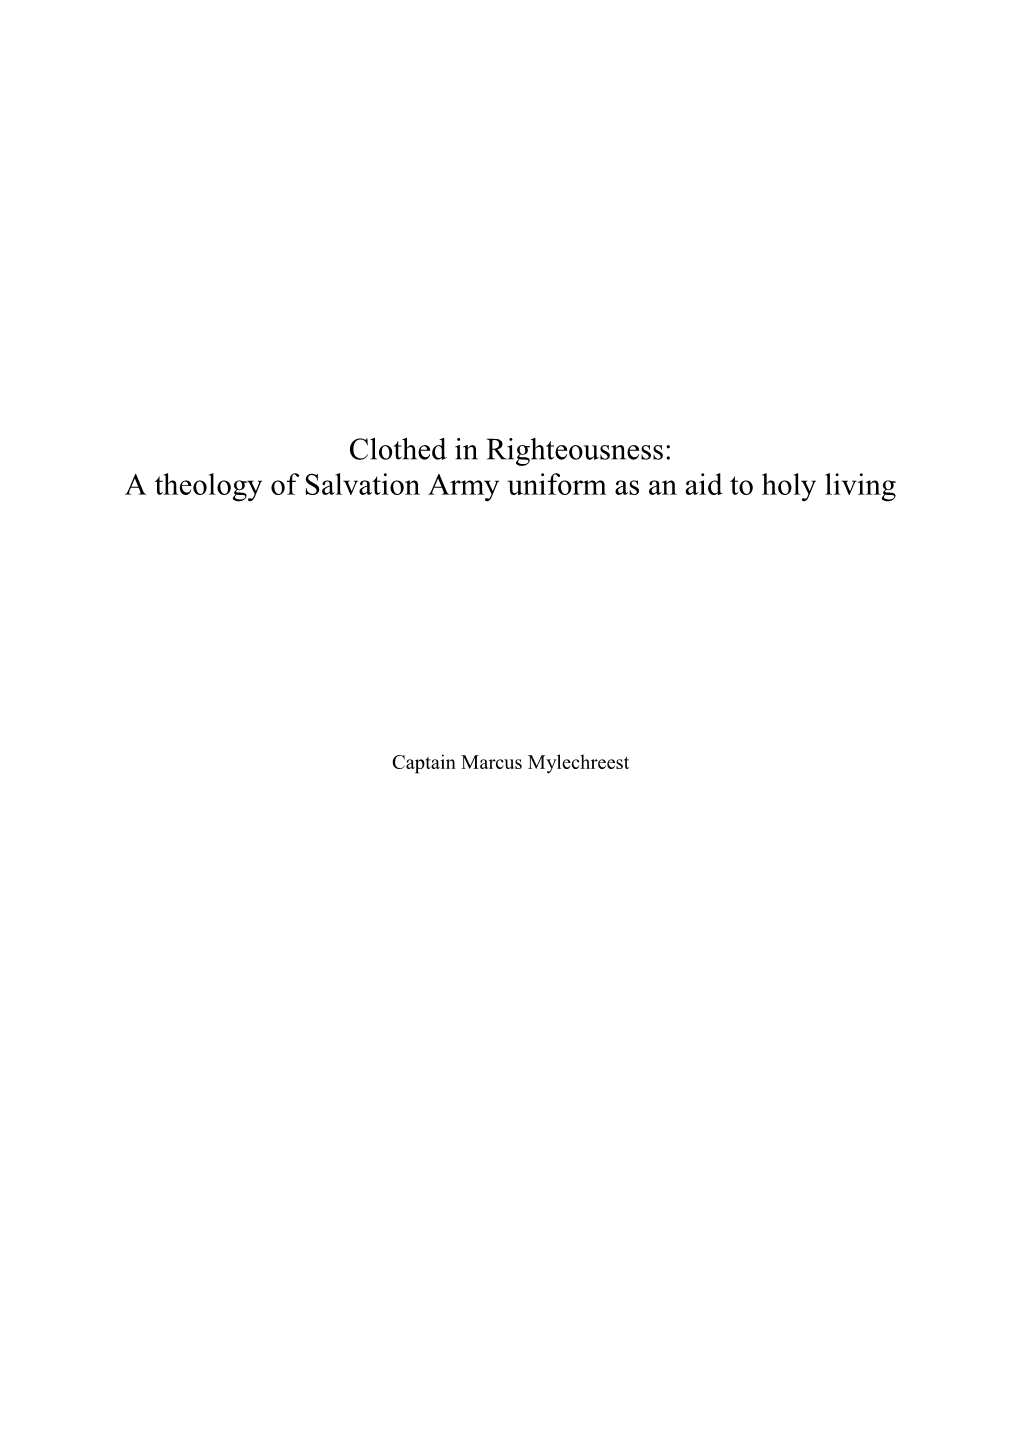 Clothed in Righteousness: a Theology of Salvation Army Uniform As an Aid to Holy Living